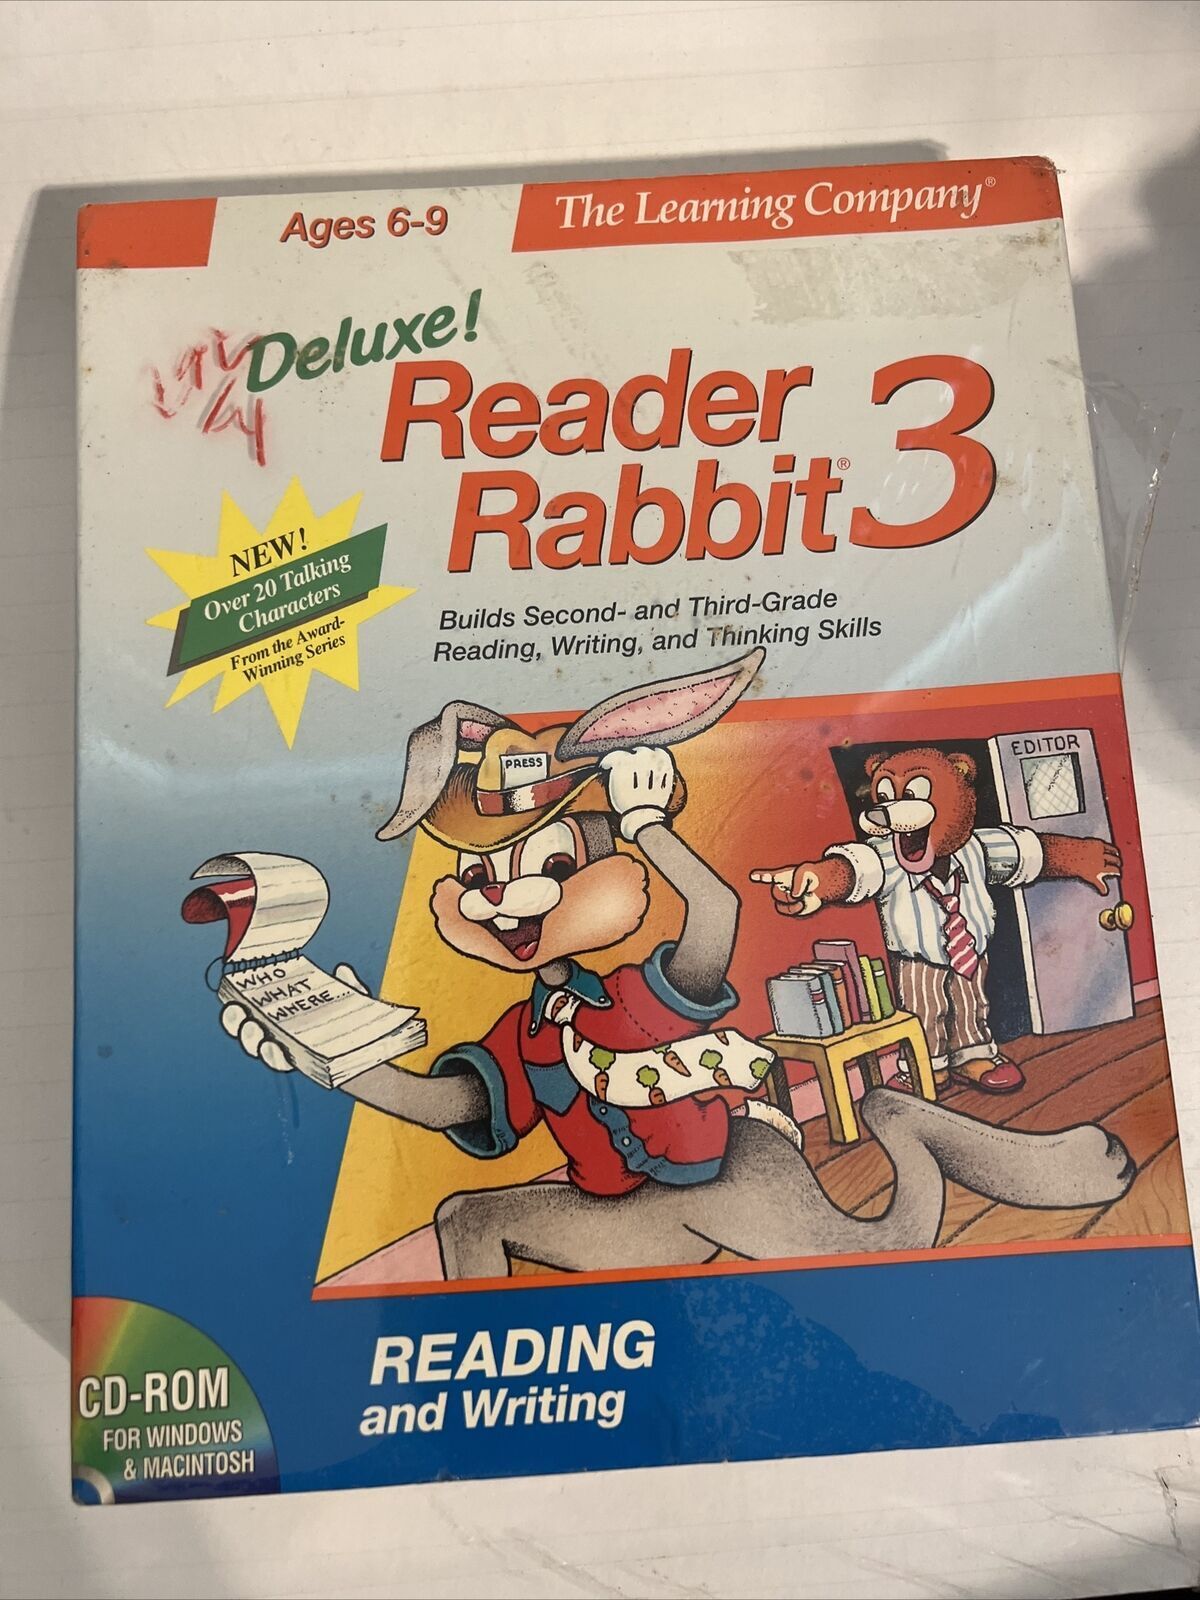 Deluxe Reader Rabbit 3 The Learning Company Big Box PC Game